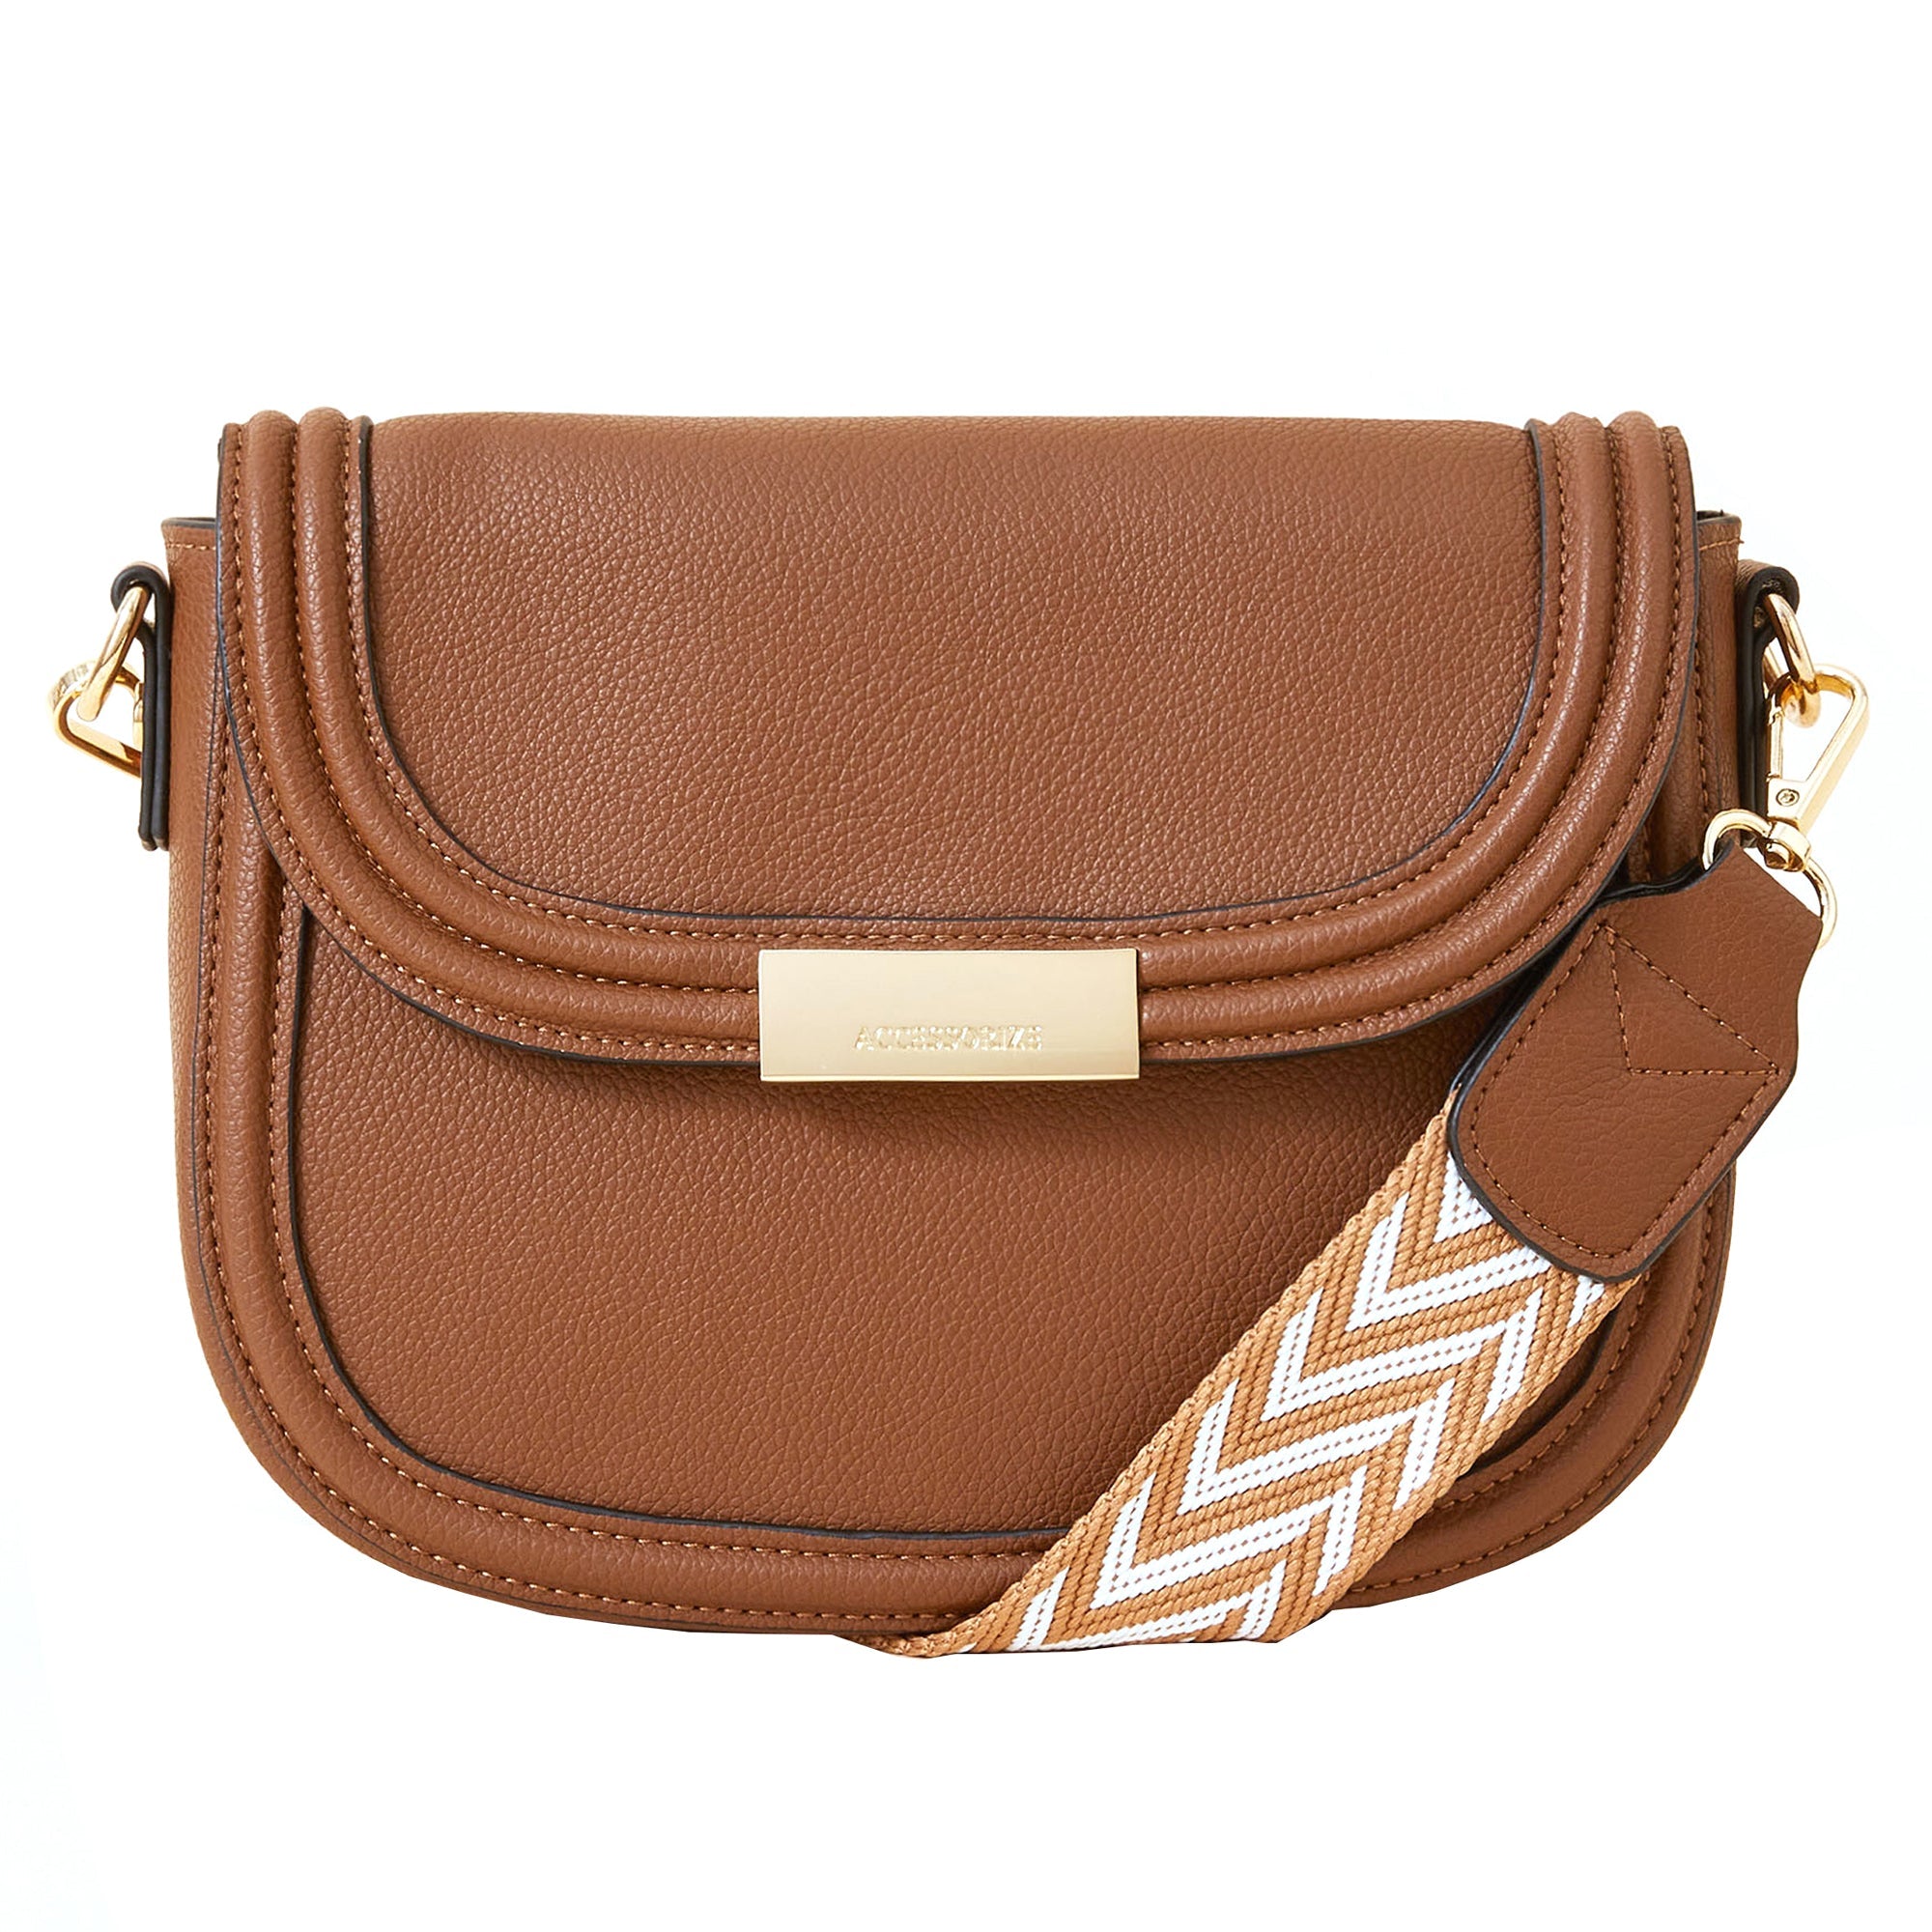 Buy Accessories Online  Sale on Bags Belts  Wallets  ONLY